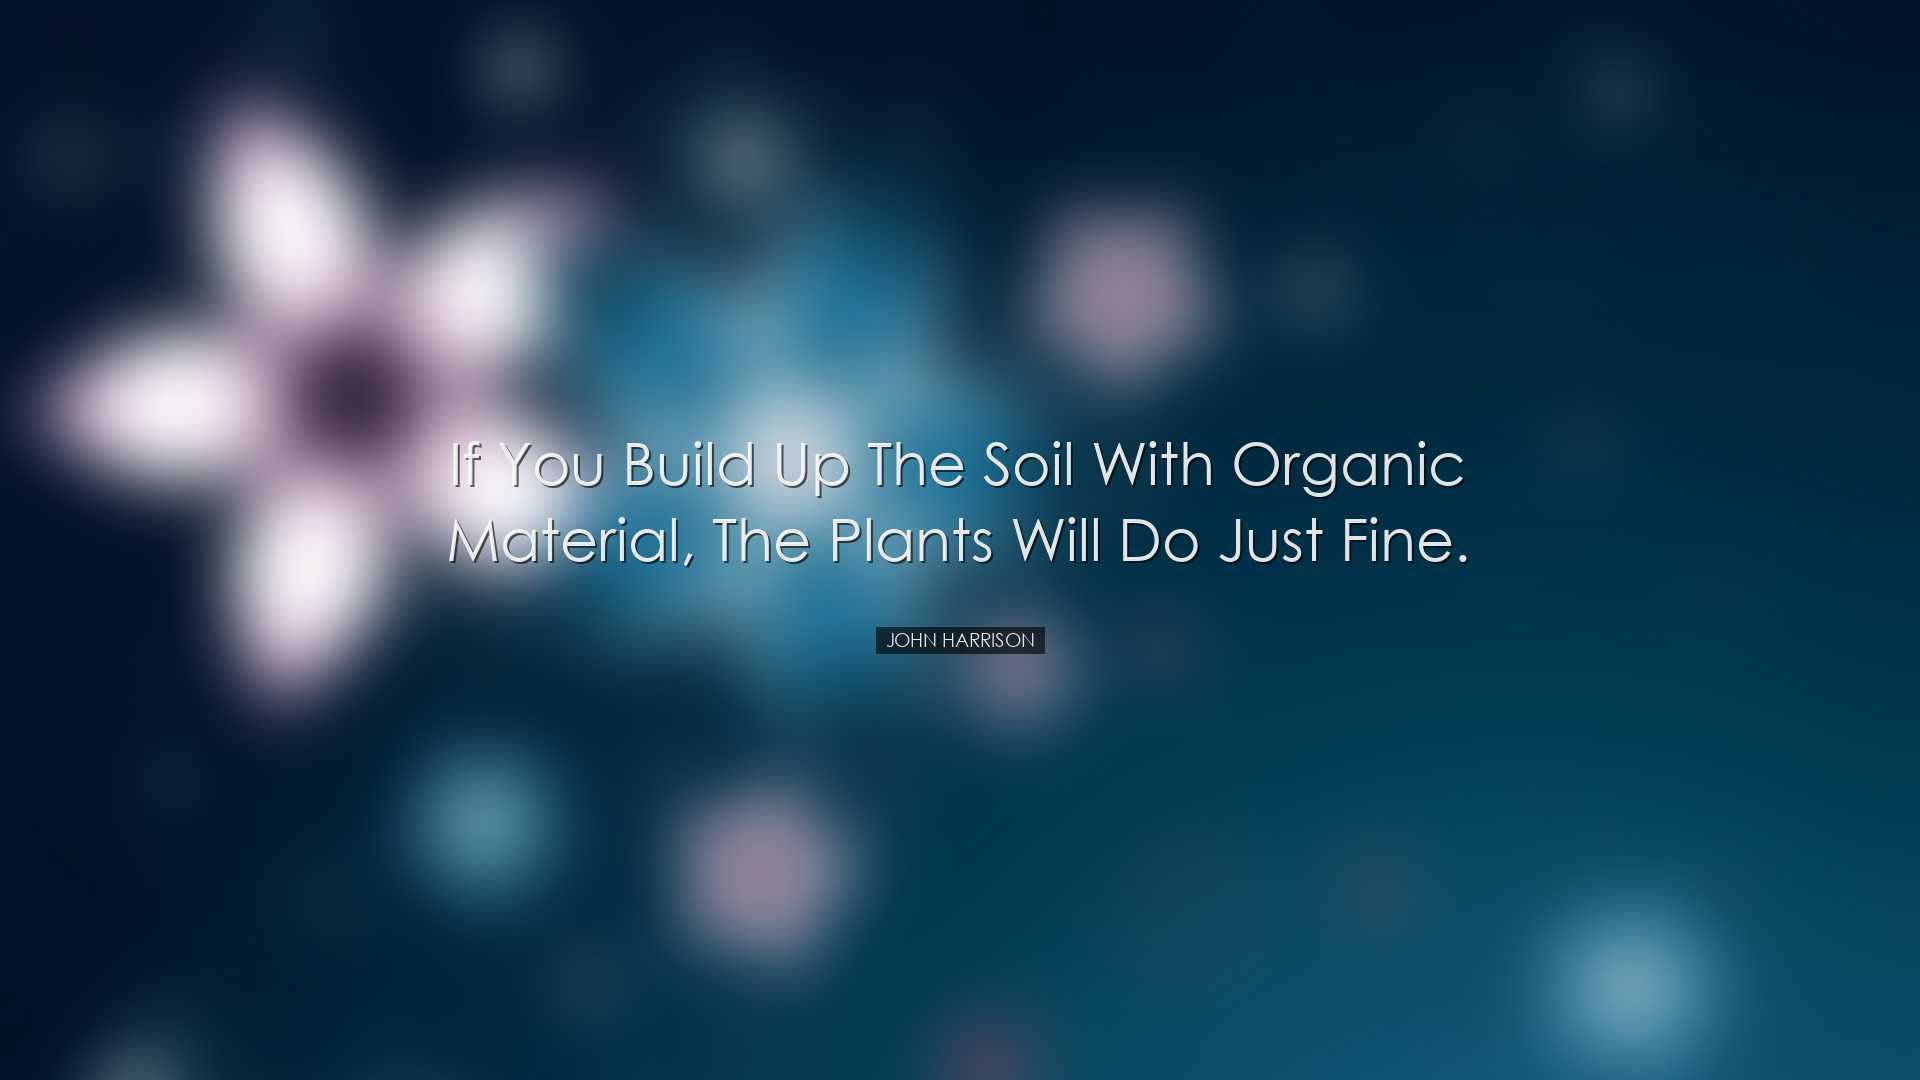 If you build up the soil with organic material, the plants will do